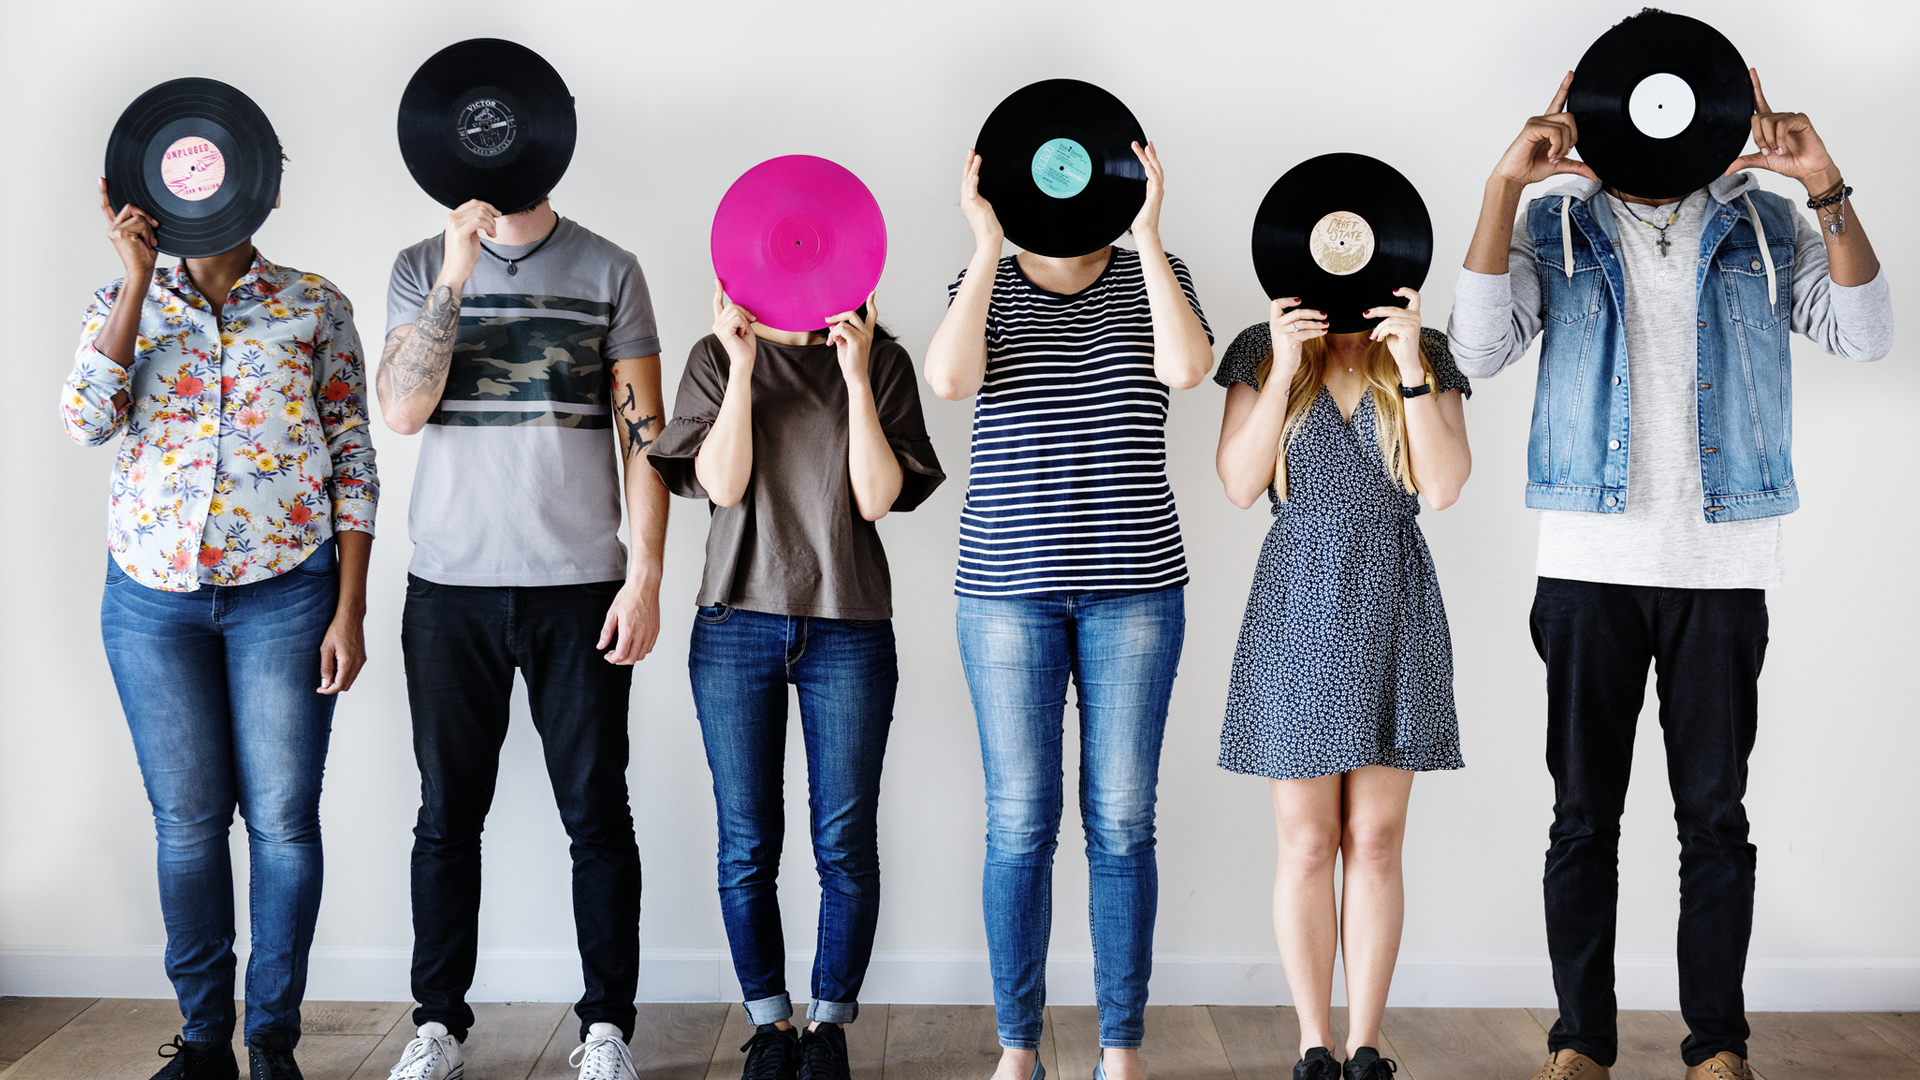 Bunch of people holding records up over their faces